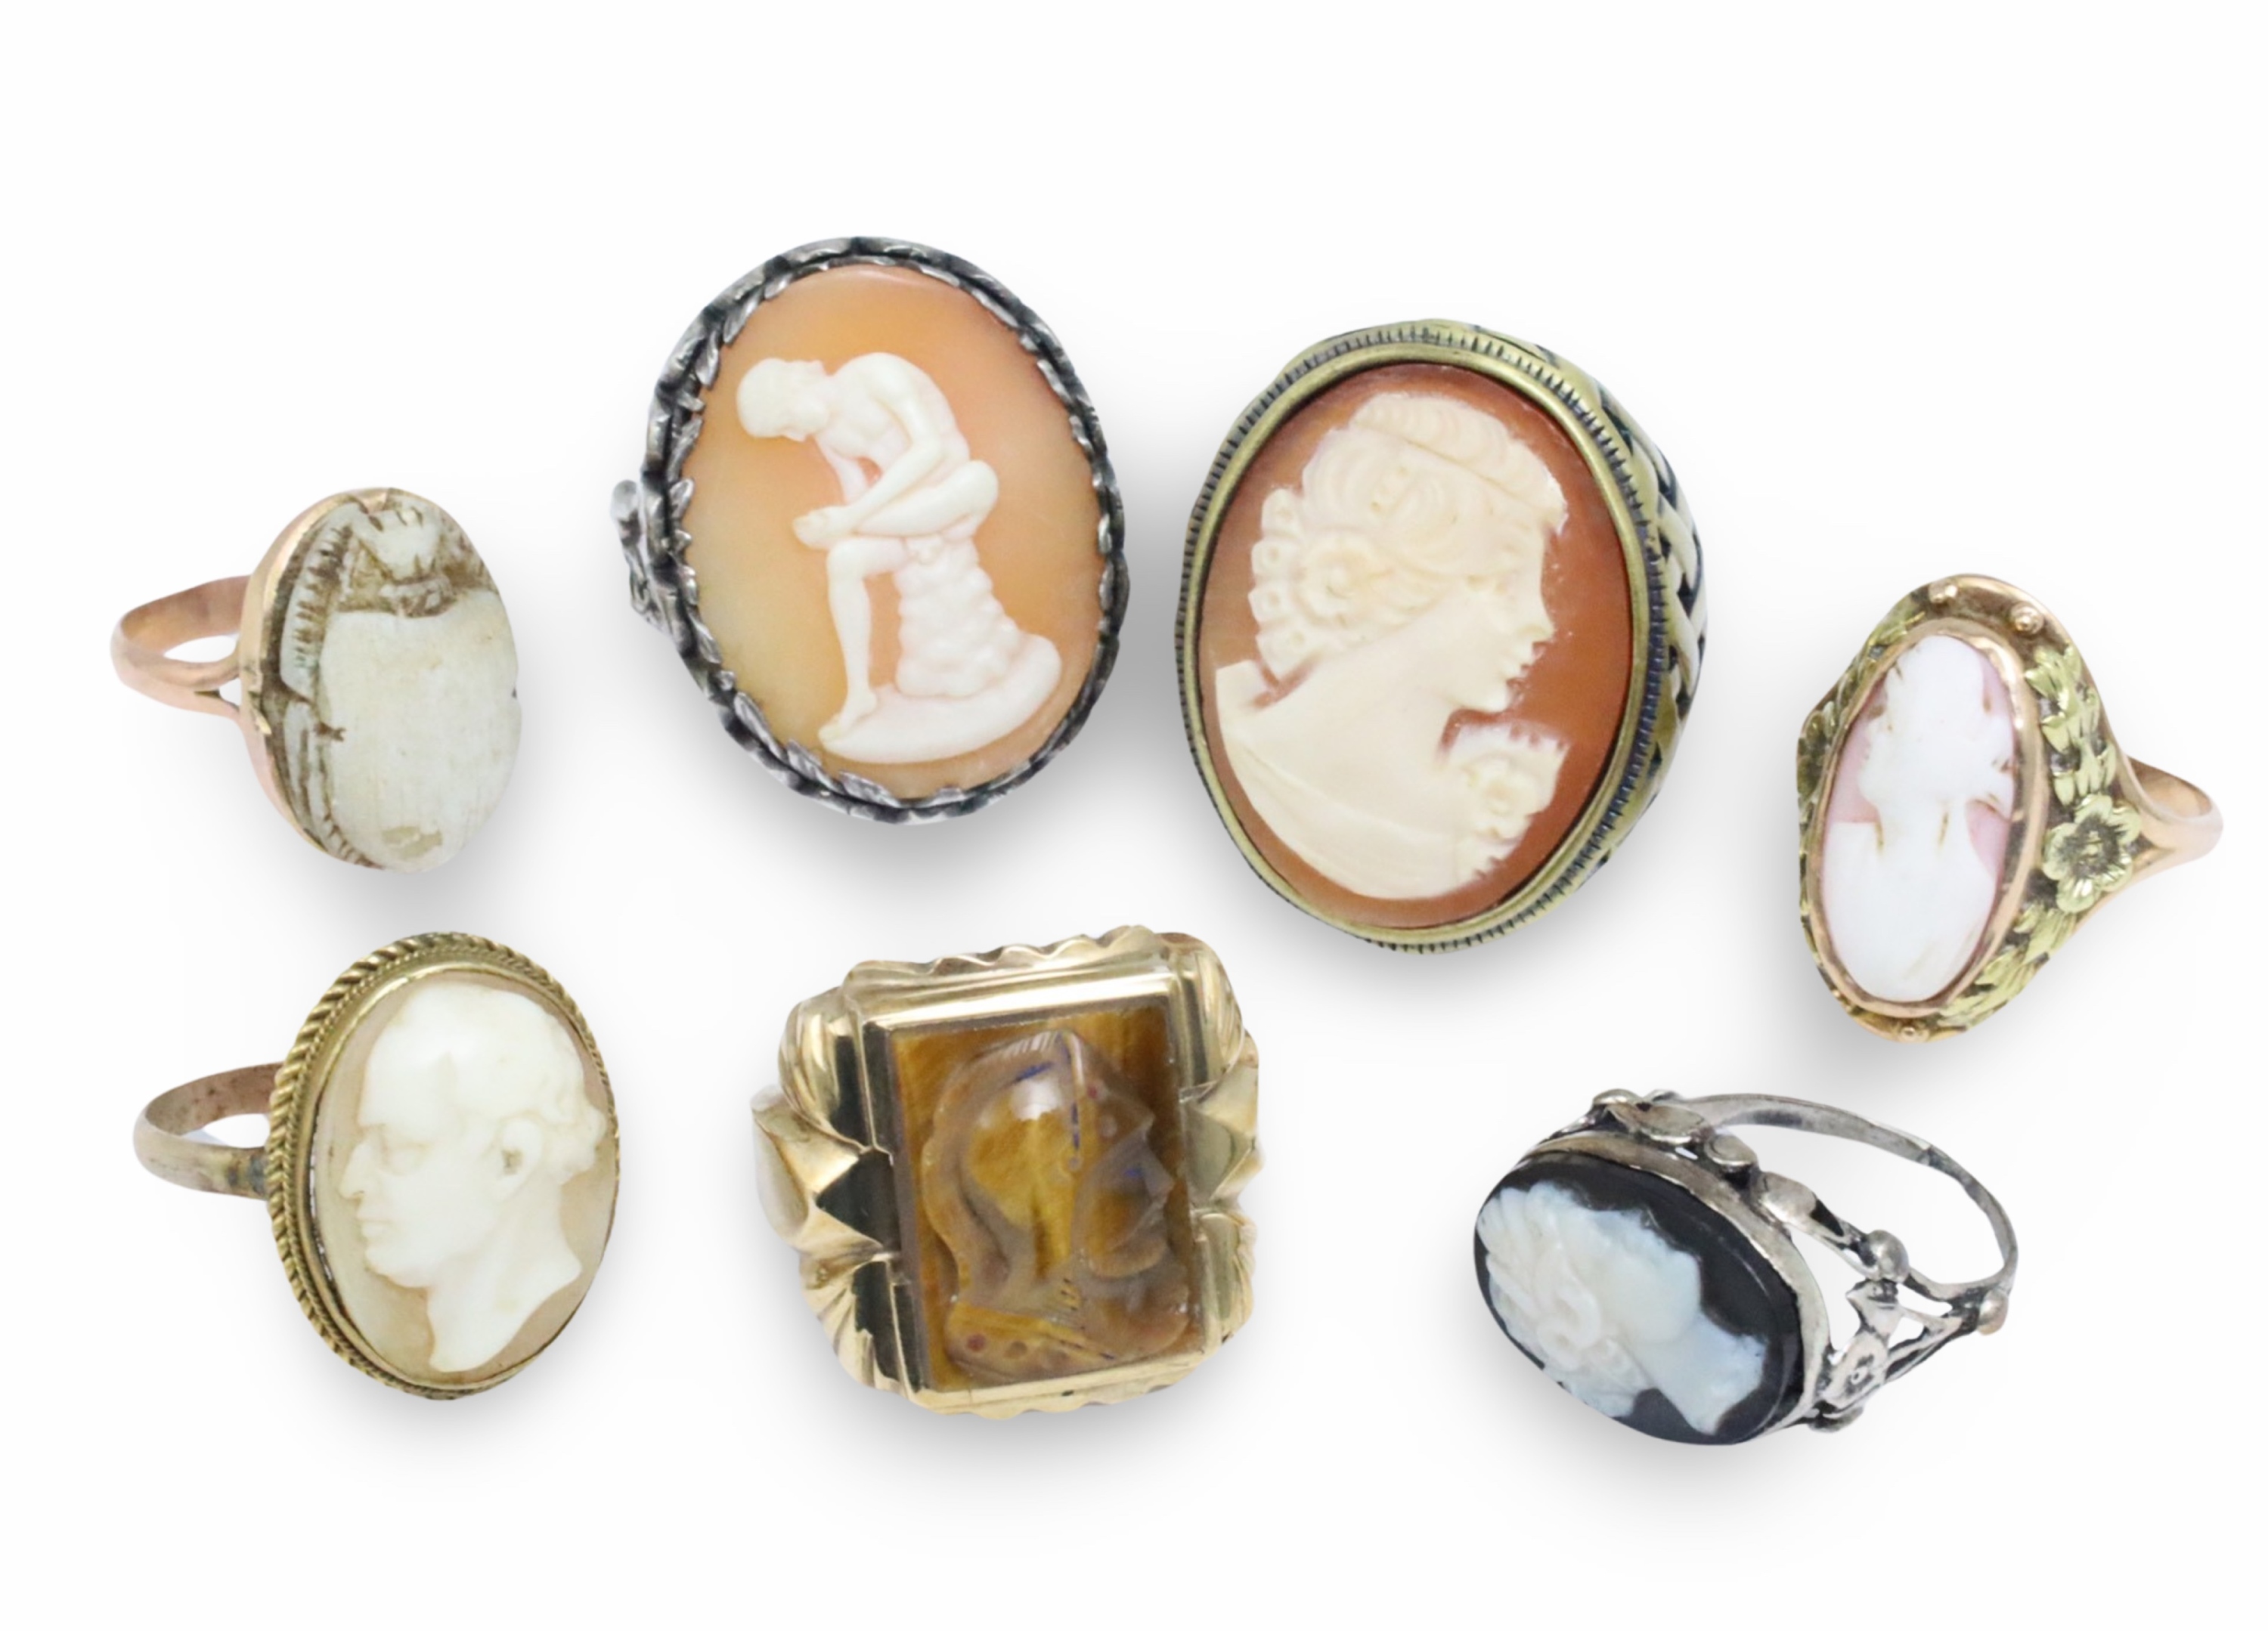 7 ANTIQUE CAMEO RINGS INCL. 14K